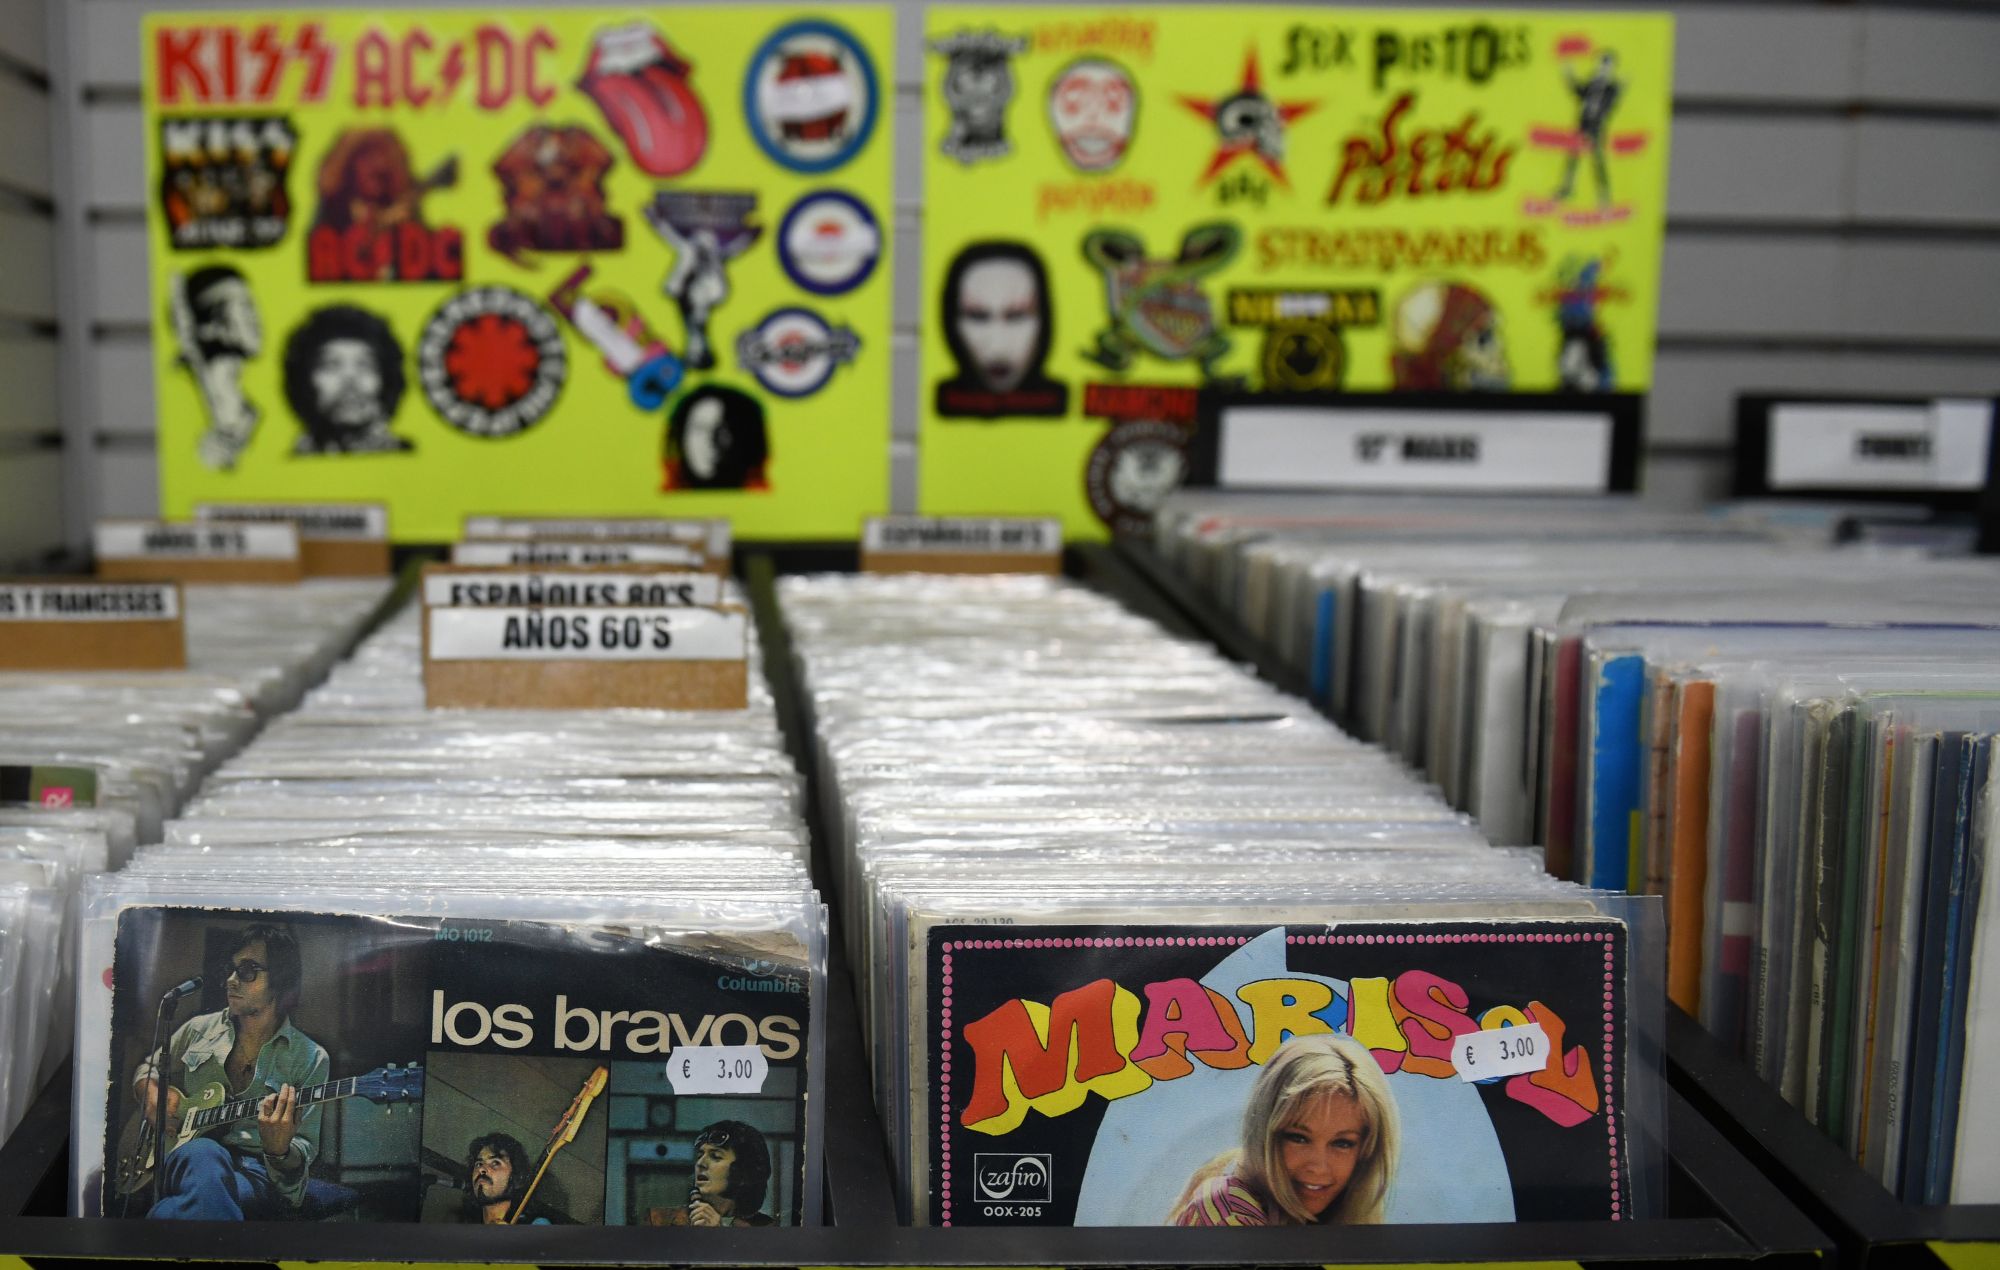  Several vinyls in the second-hand record store stock image